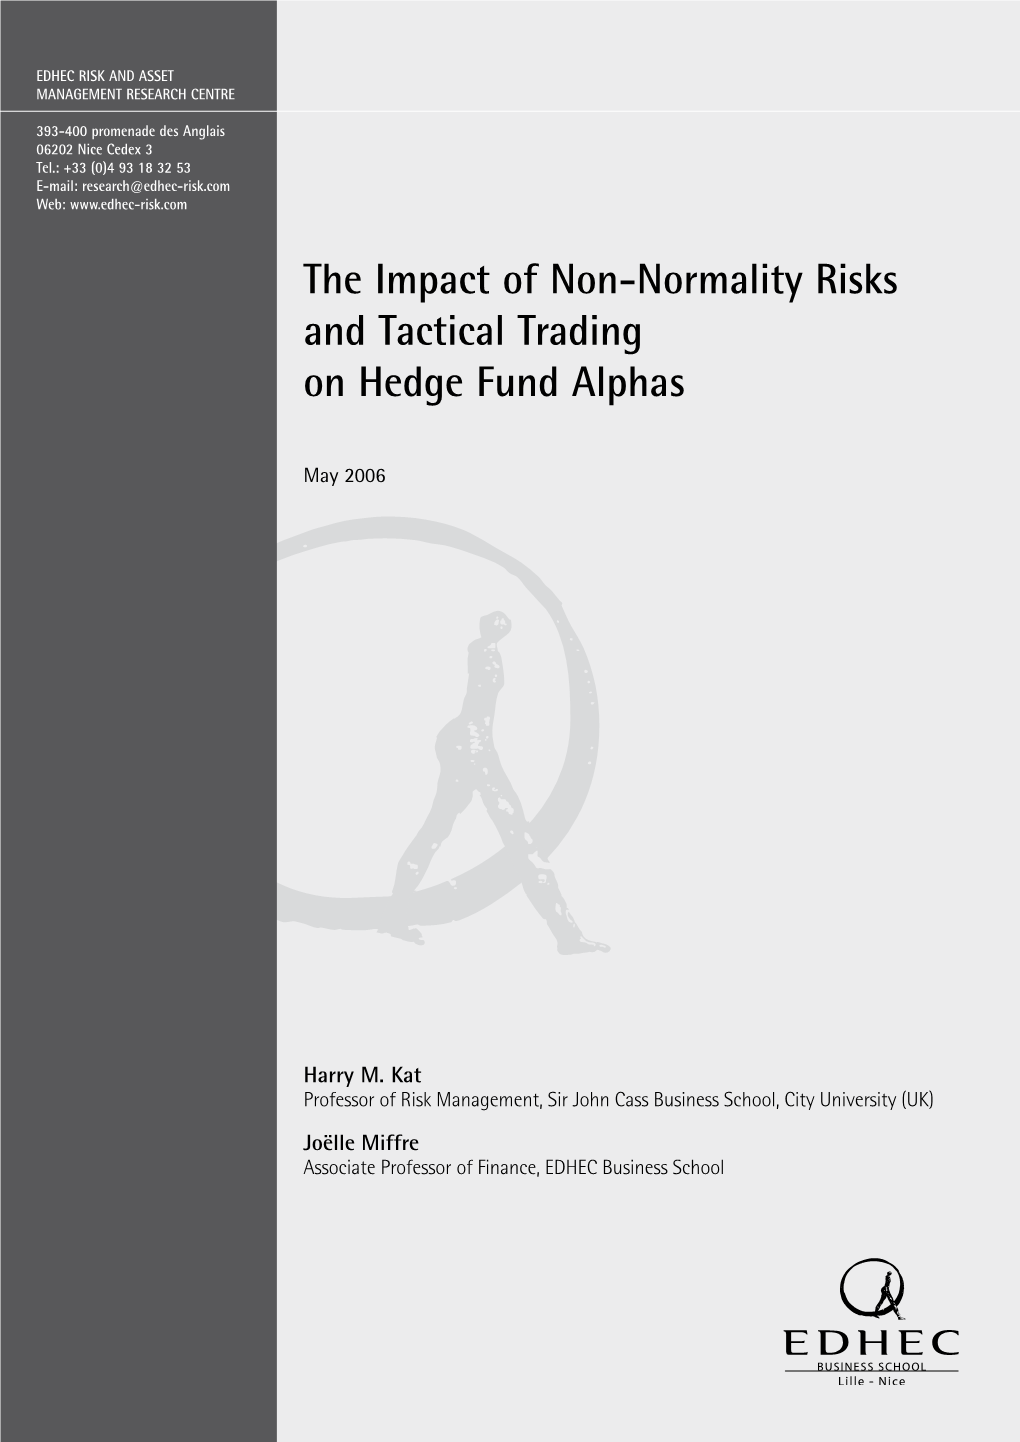 The Impact of Non-Normality Risks and Tactical Trading on Hedge Fund Alphas